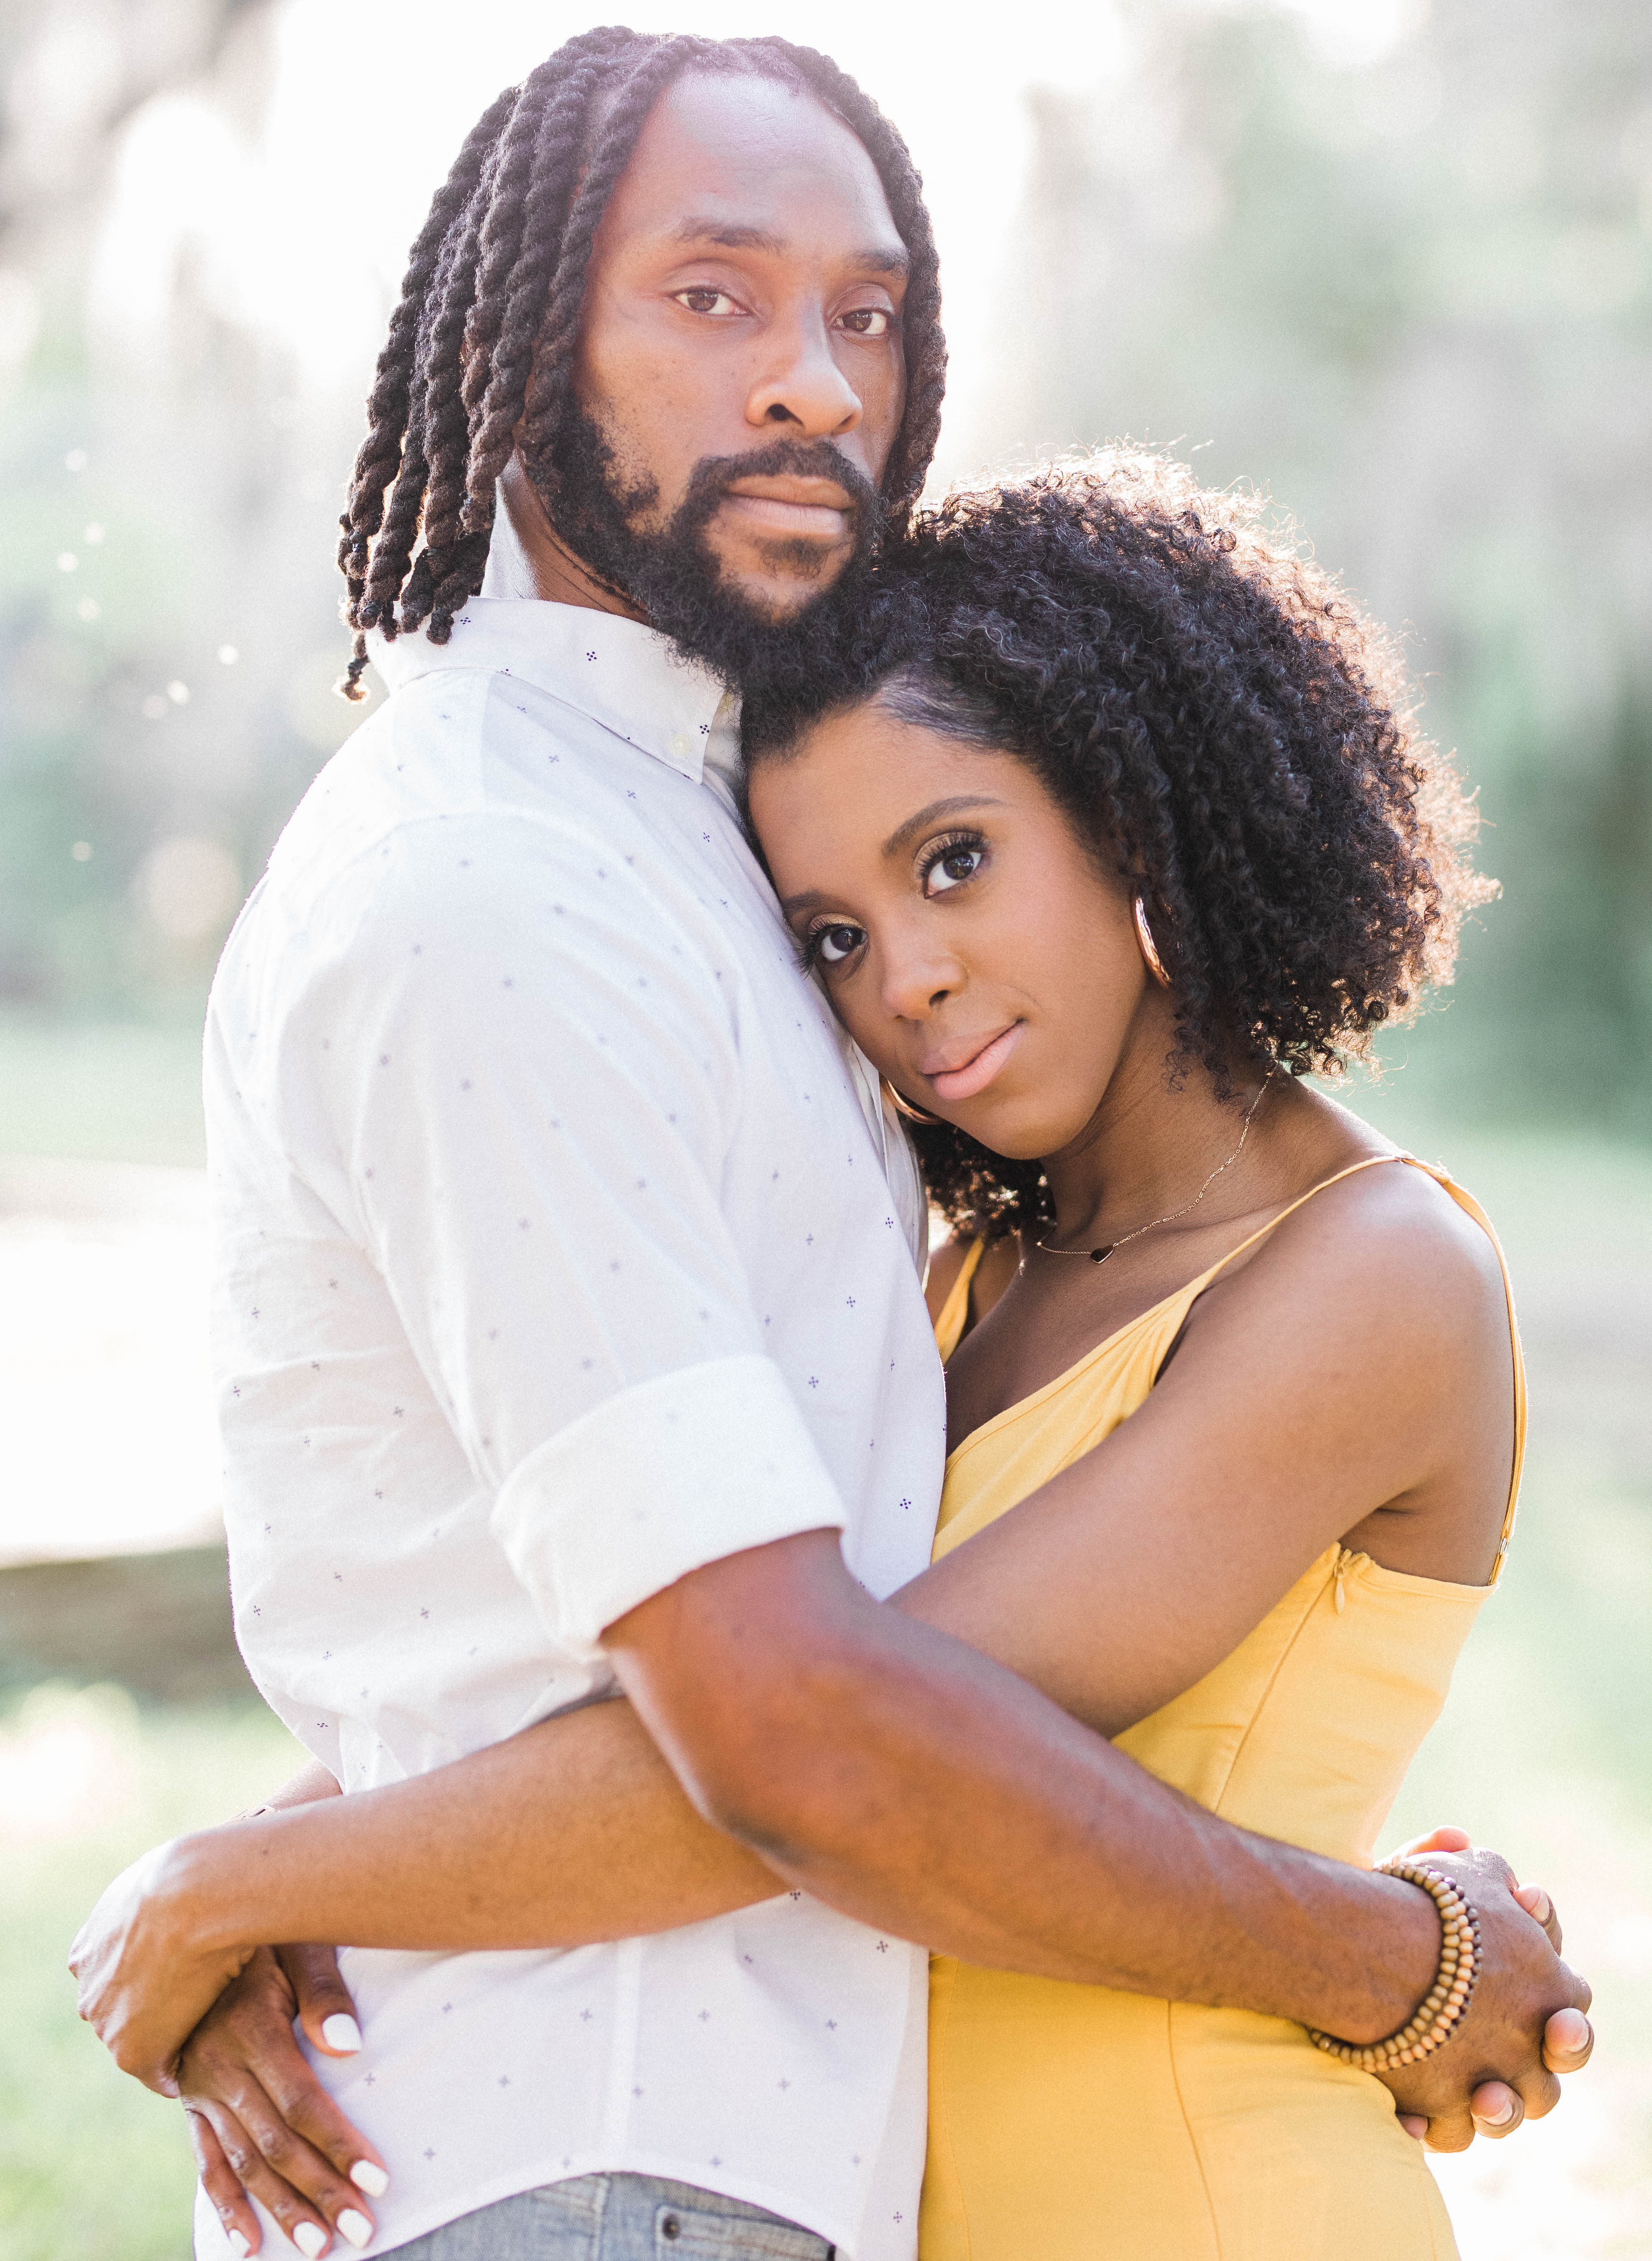 A couple's engagement photo shoot in Houston, TX.